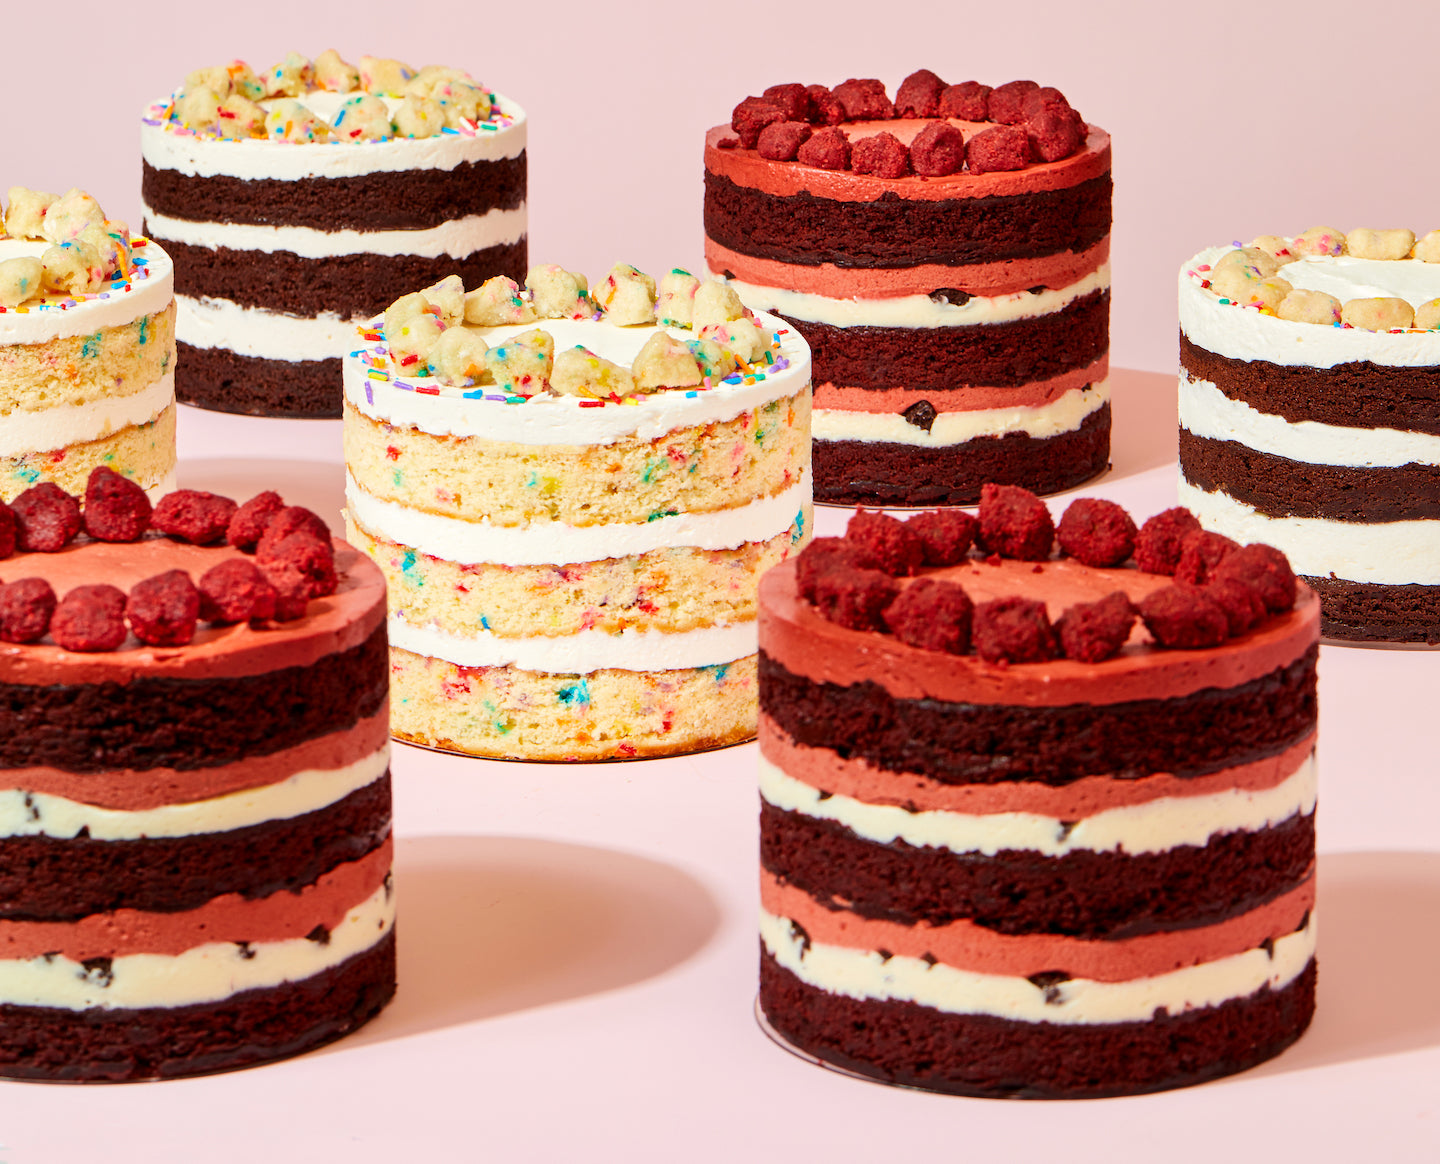 Internet Bakery Suppliers of Cake Paper Goods - Pastries Like a Pro